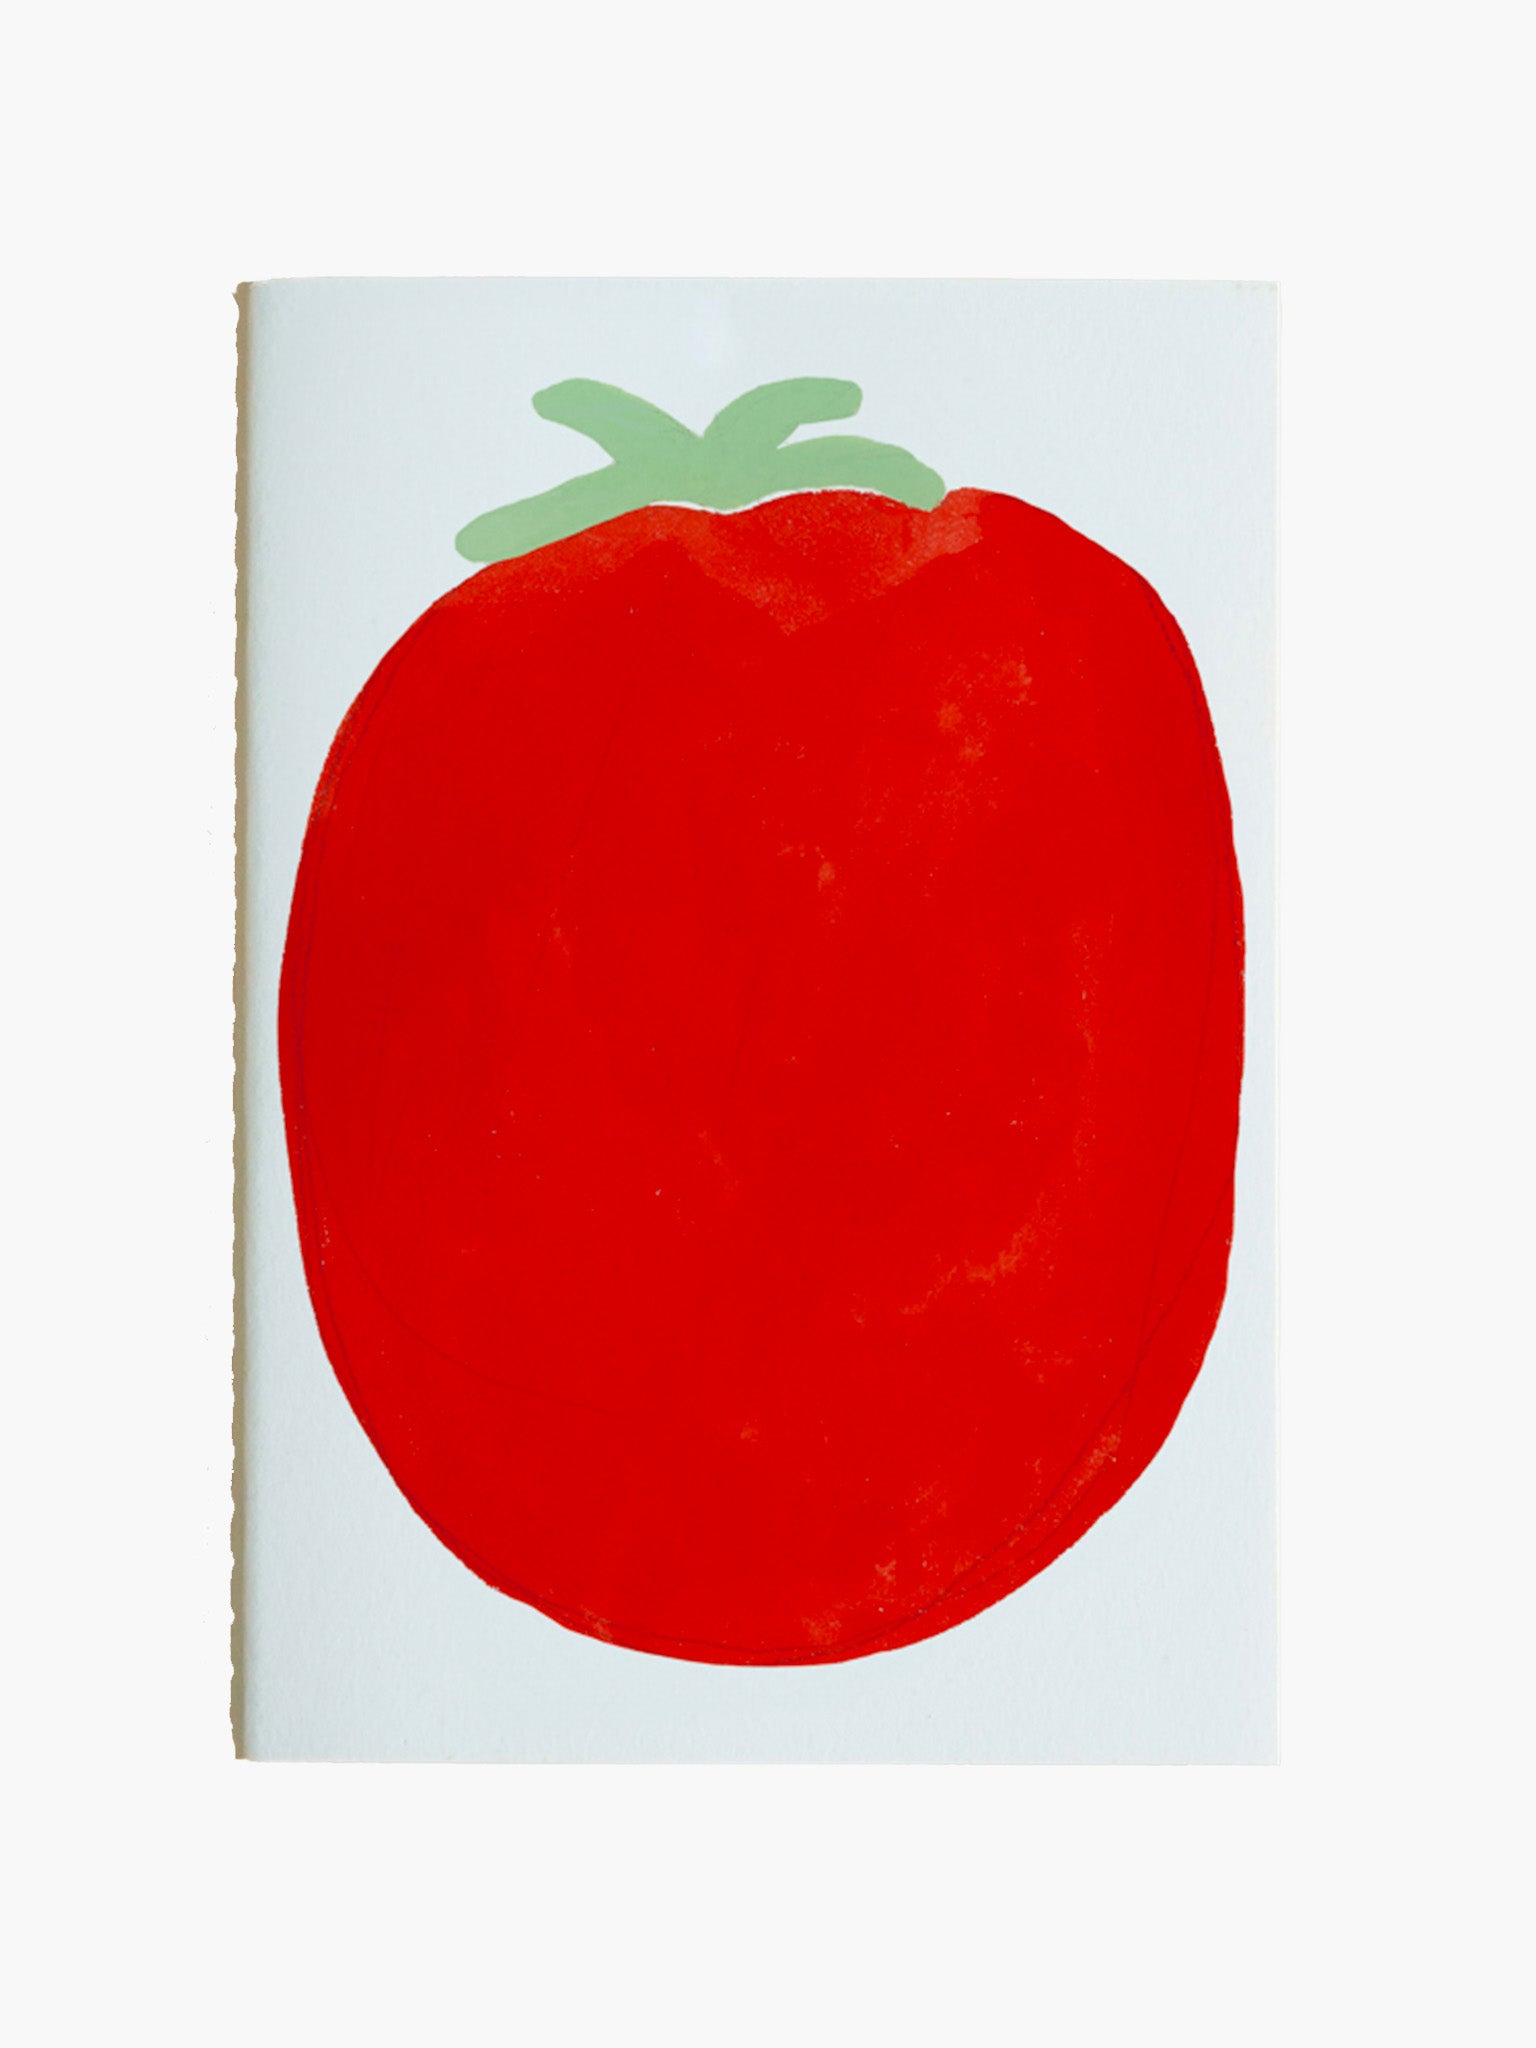 Tomato Notebook by grumsarah